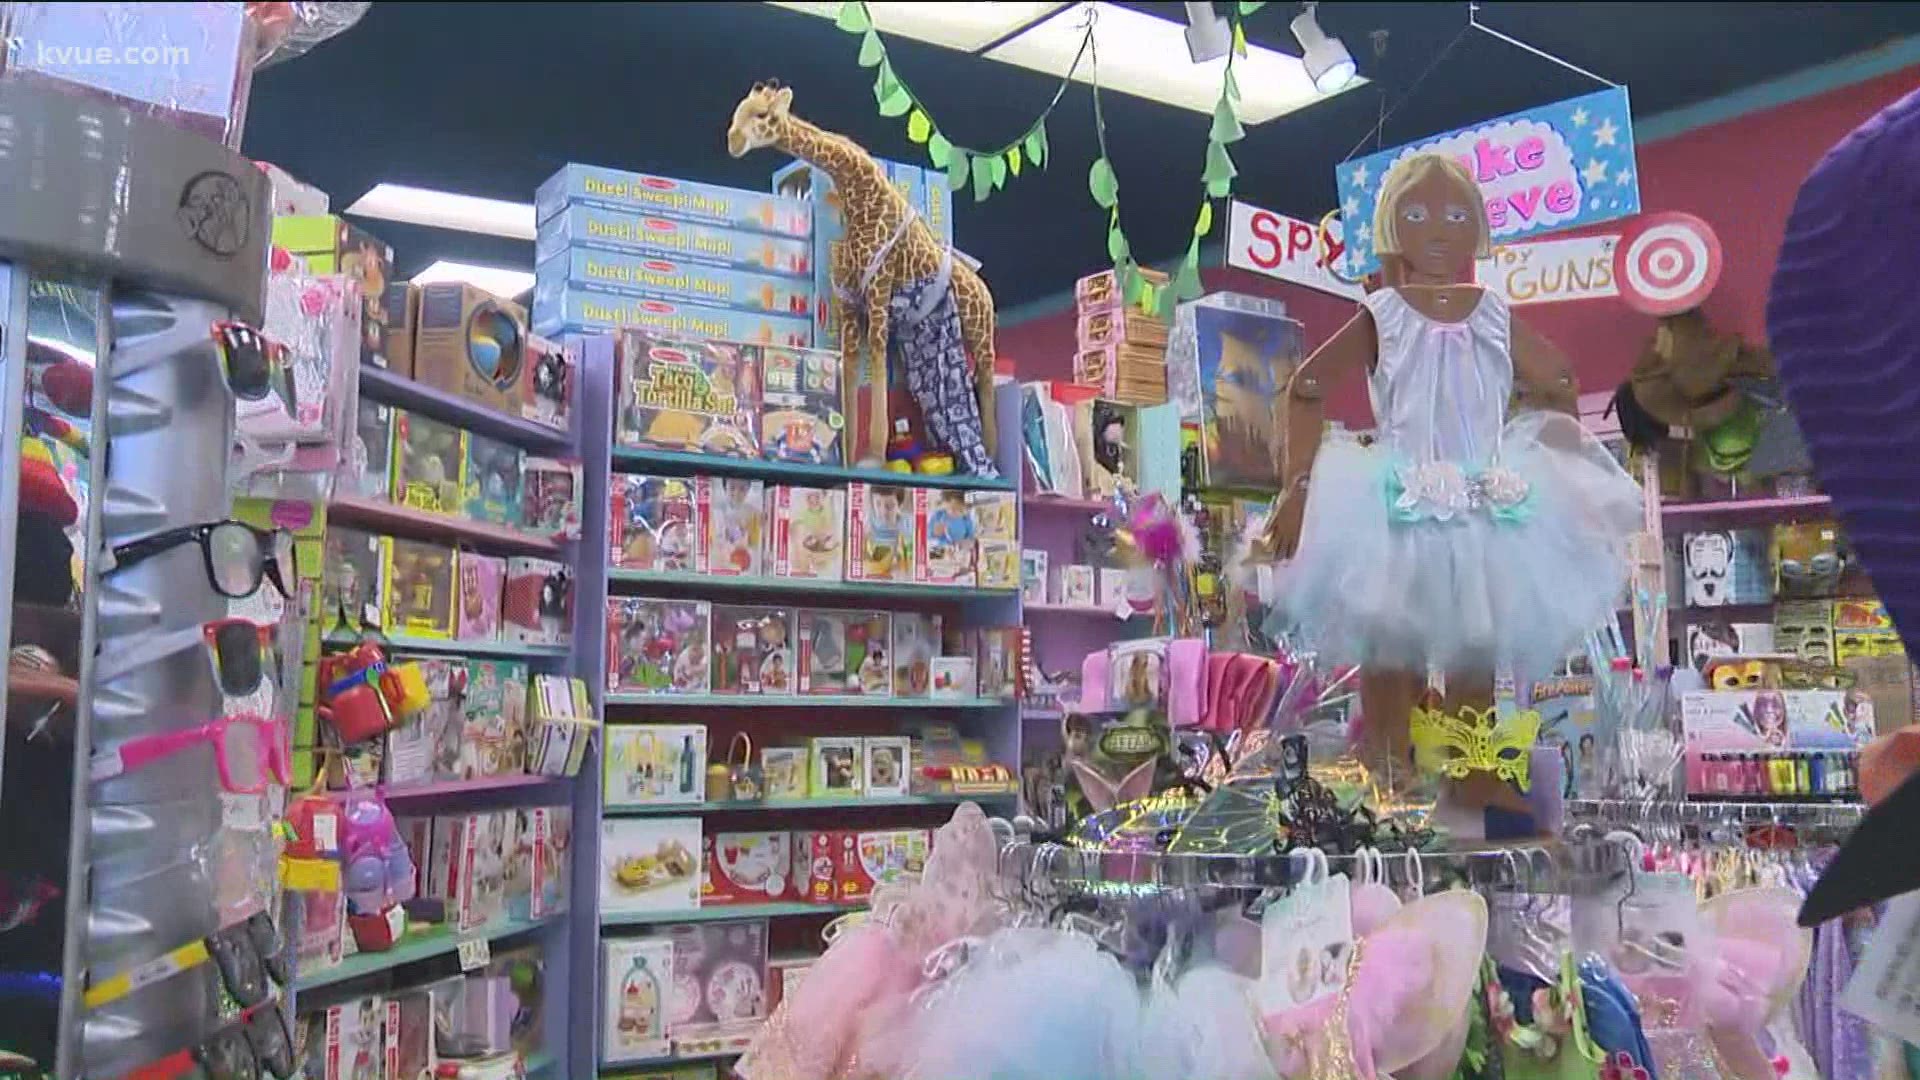 In the latest installment of KVUE's Keep Austin Local series, Brittany Flowers stopped by Terra Toys. The toy shop has been around for more than 40 years.